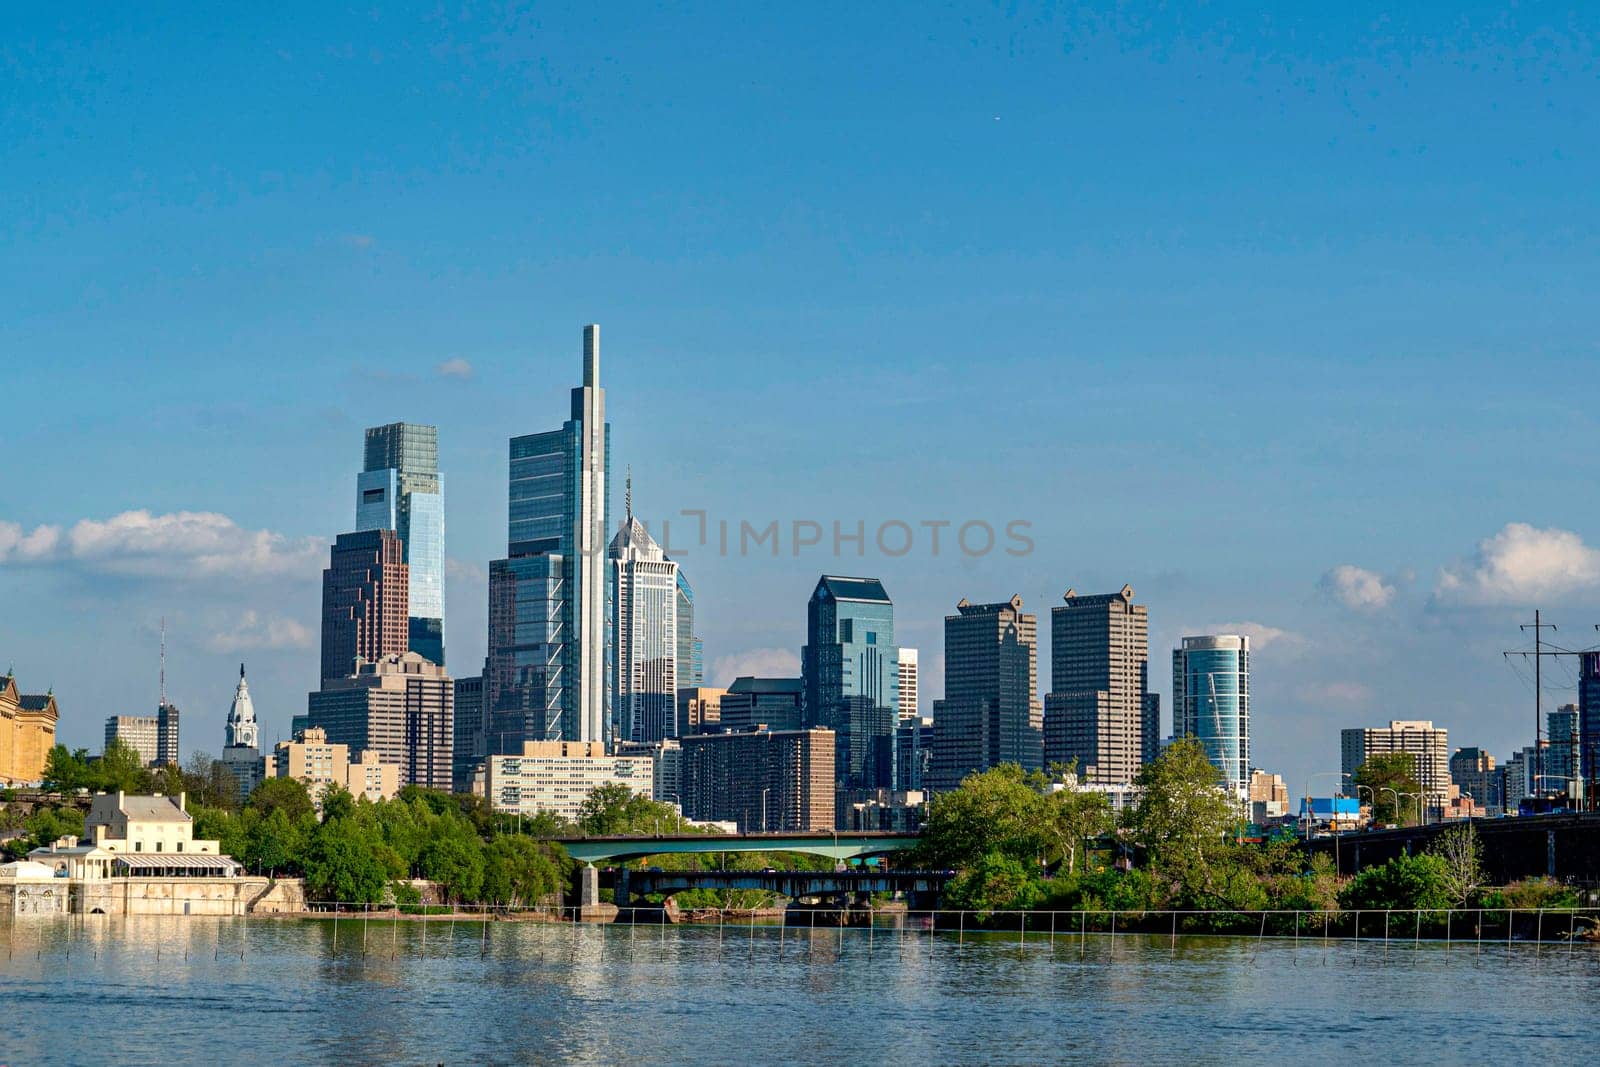 The Schuylkill River looking south toward the Philadelphia skyline is the place for training regatta of rowing team